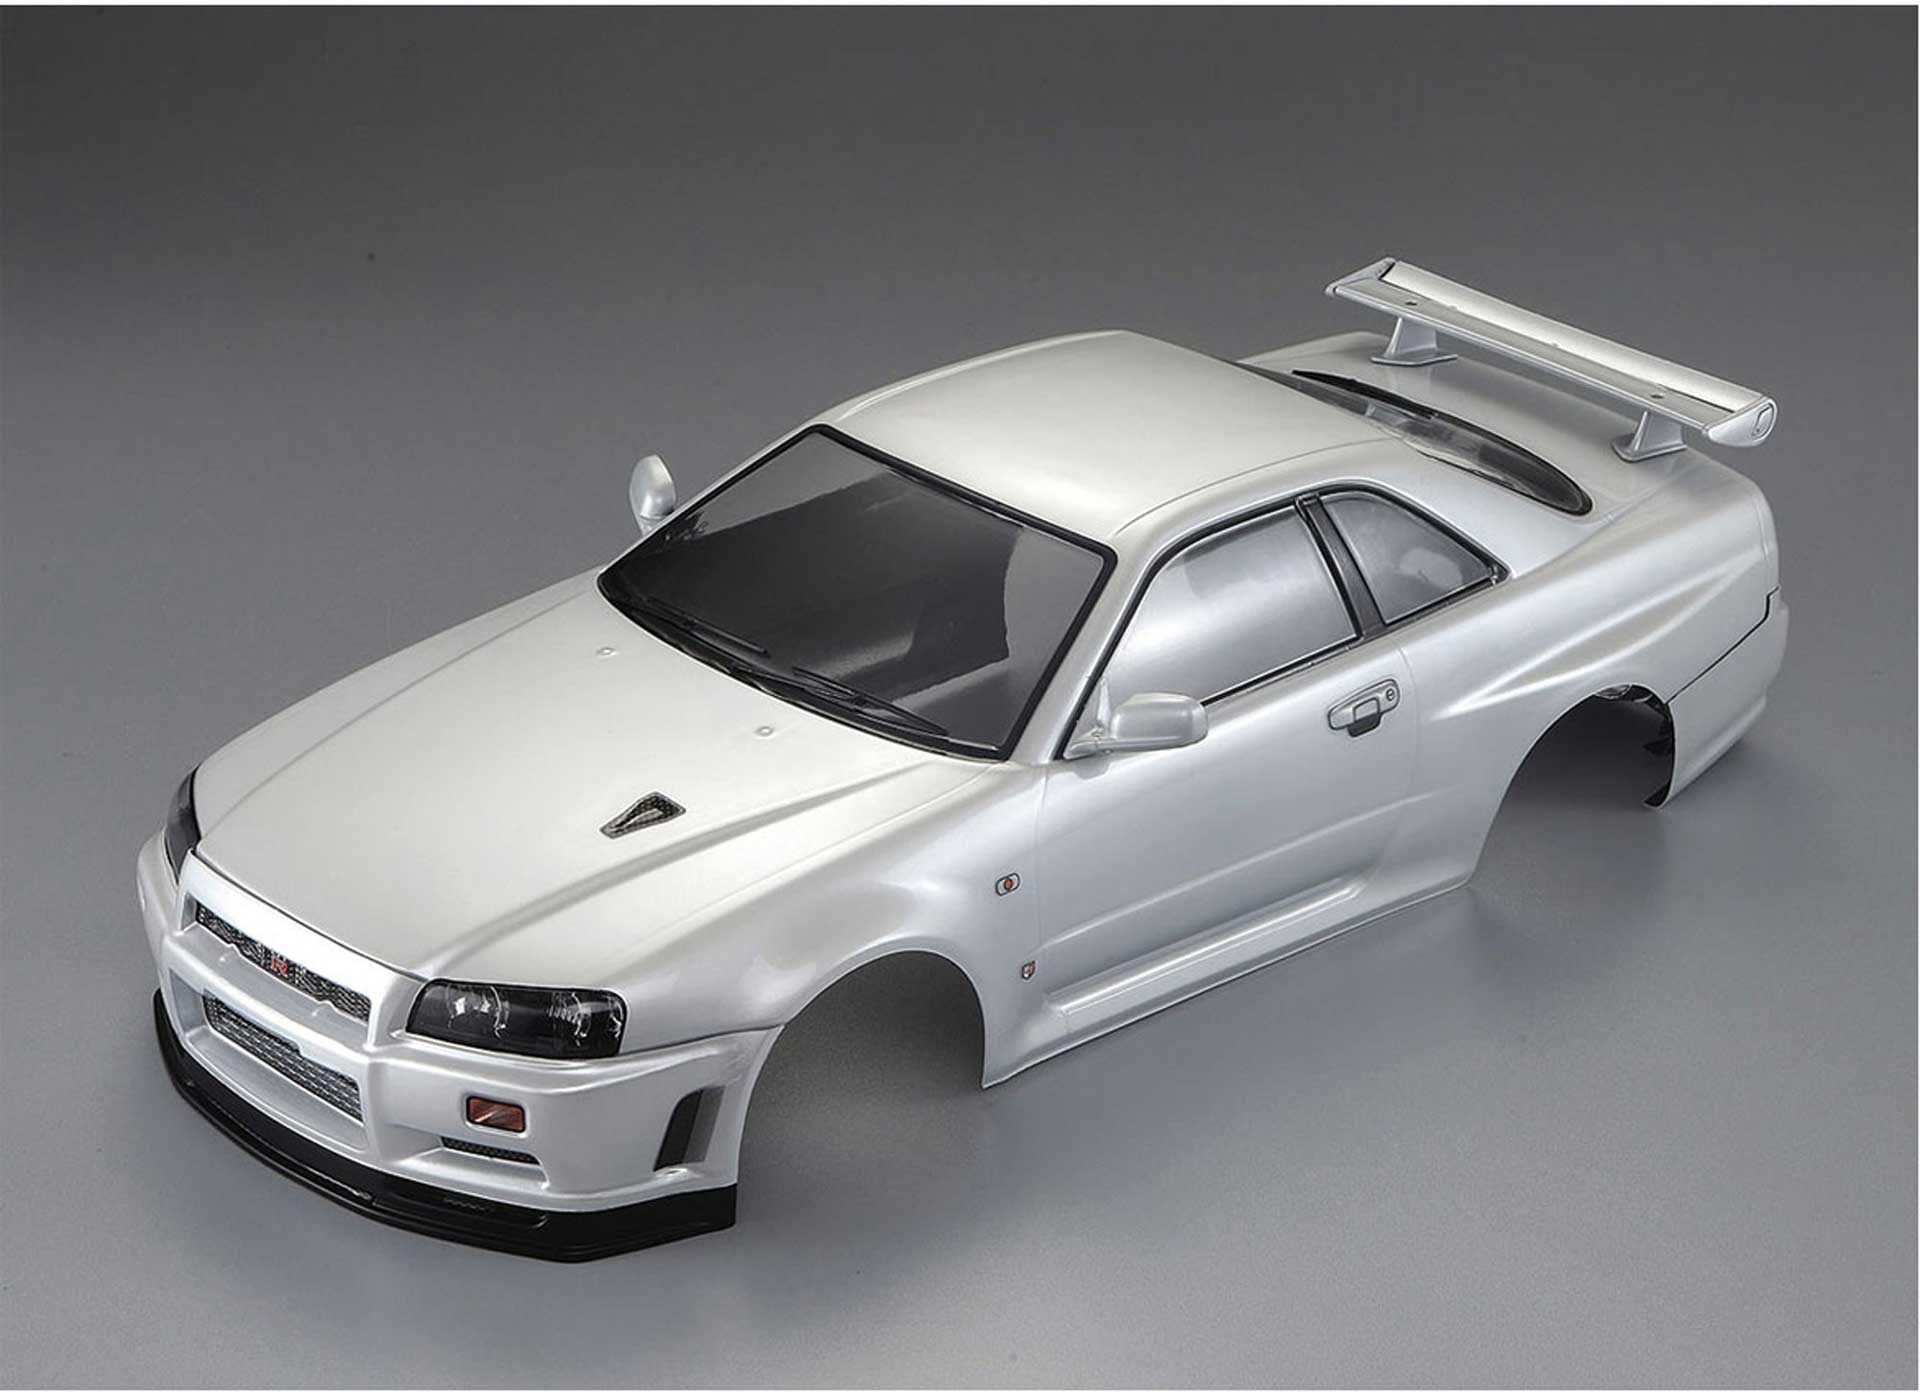 KILLER BODY NISSAN SKYLINE R34 BODY PEARL WHITE ALL-IN PAINTED